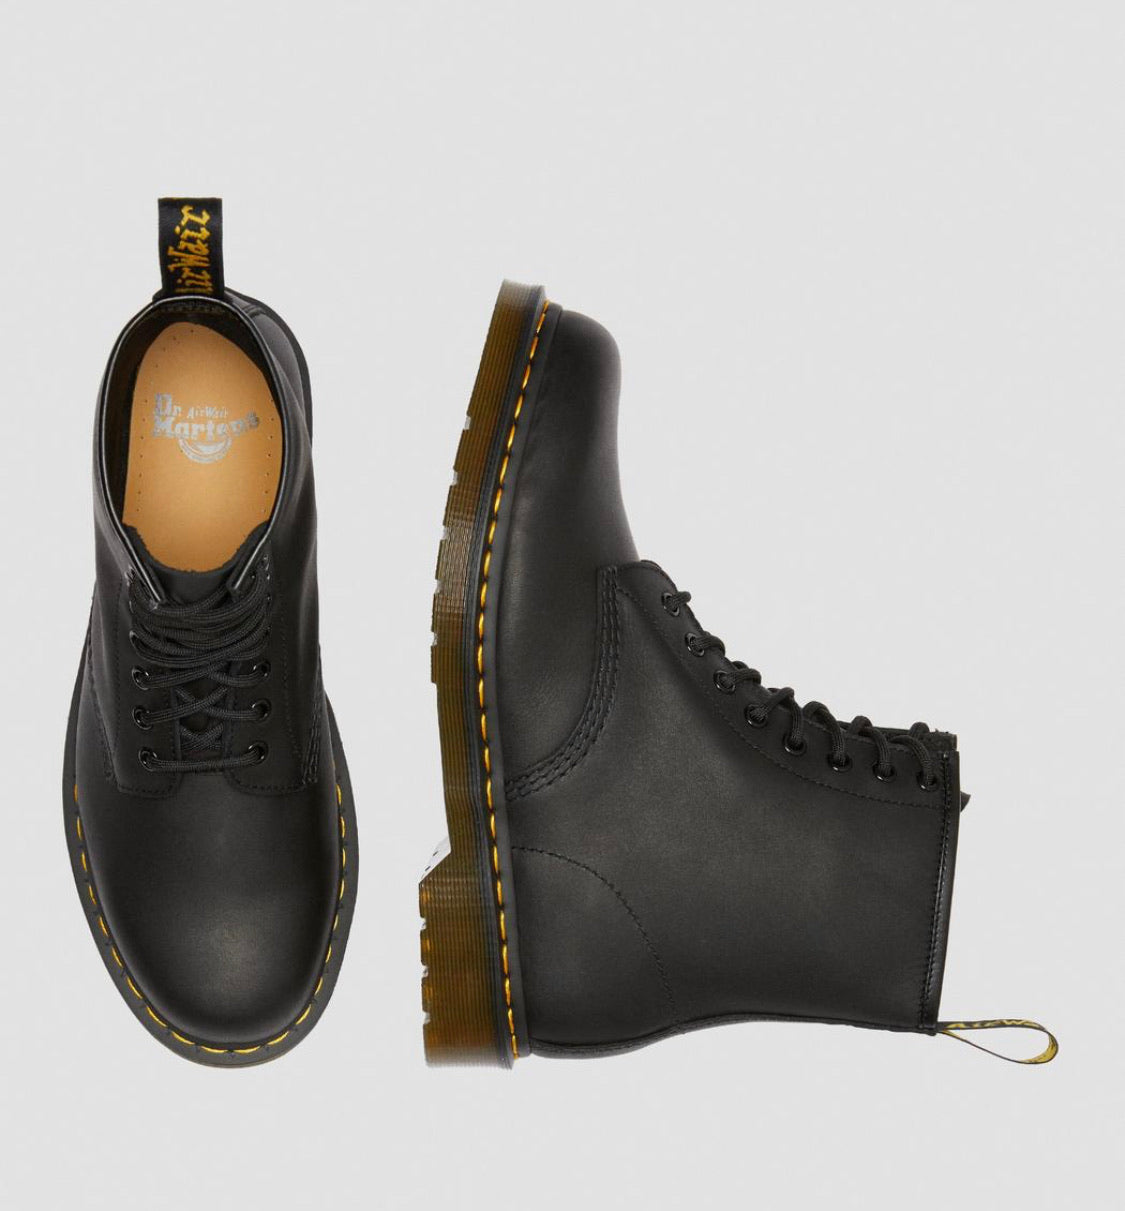 DR Martens Black 1460 Boot “Greasy“ - All Mixed Up 